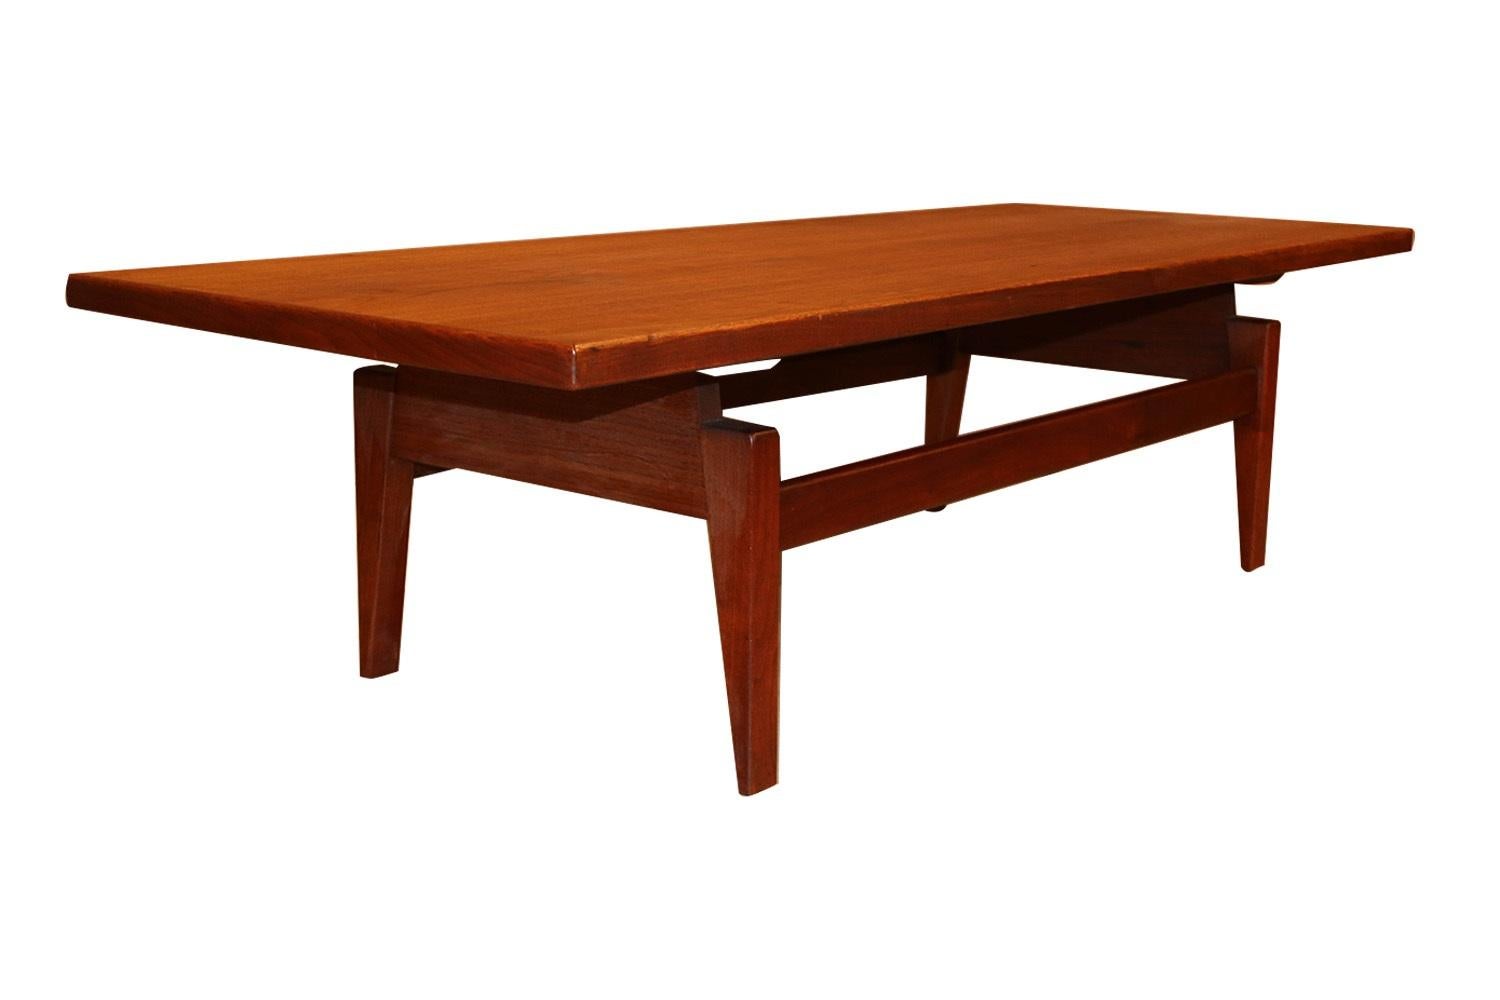 Midcentury Jens Risom Floating Top Coffee Table Bench In Good Condition For Sale In Baltimore, MD